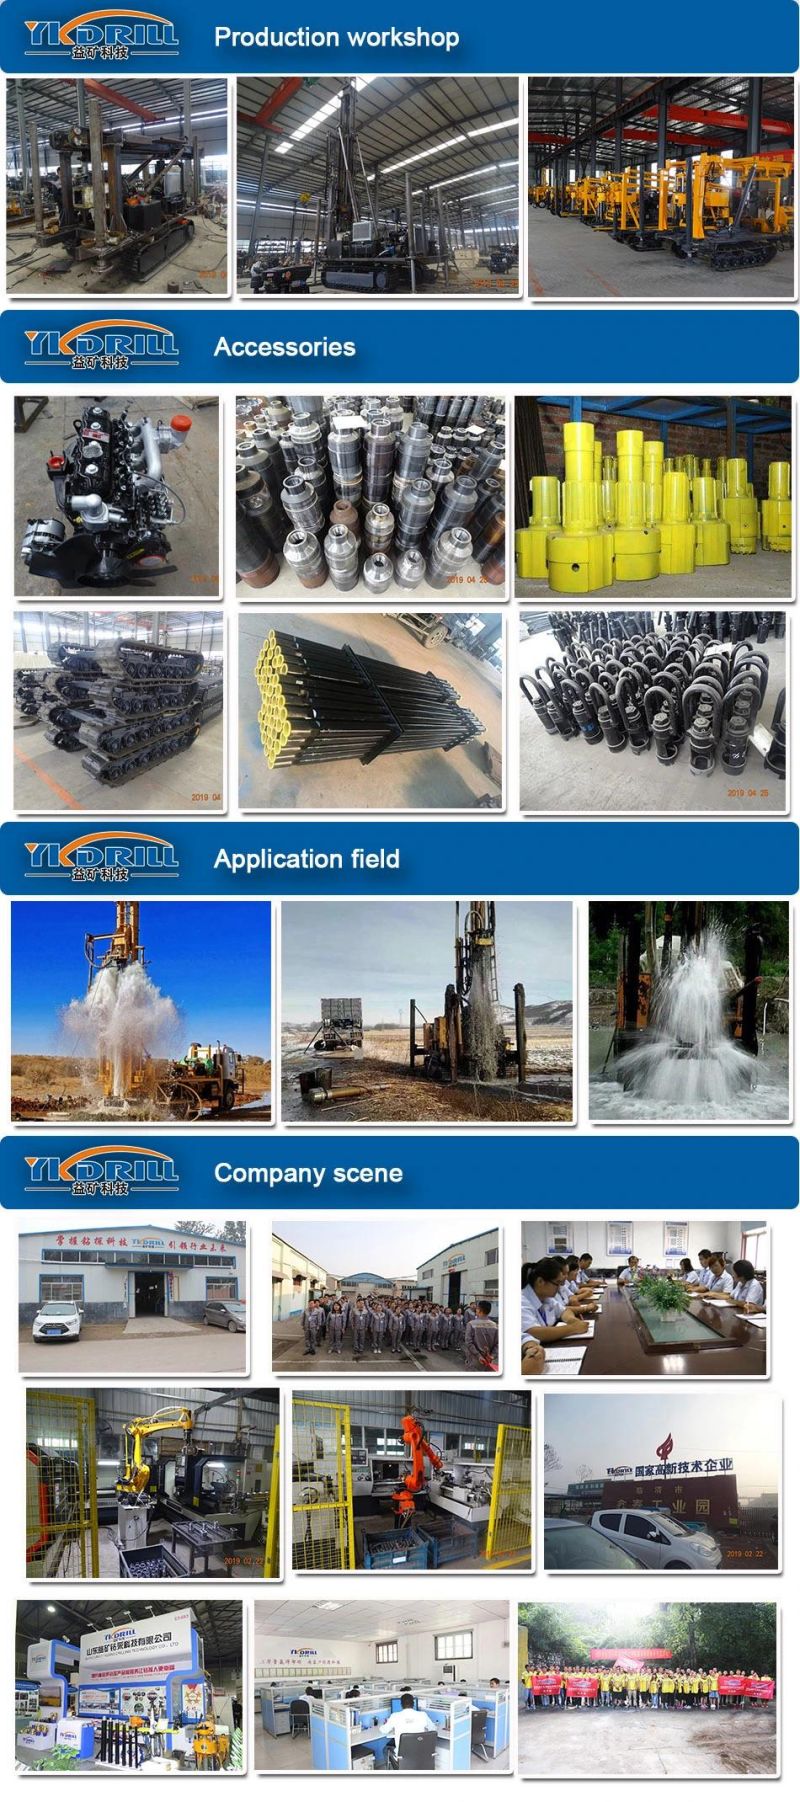 Multifunction Mechanical No Use Compressor Top Drive Geological Core Water Well Drilling Rig Machine